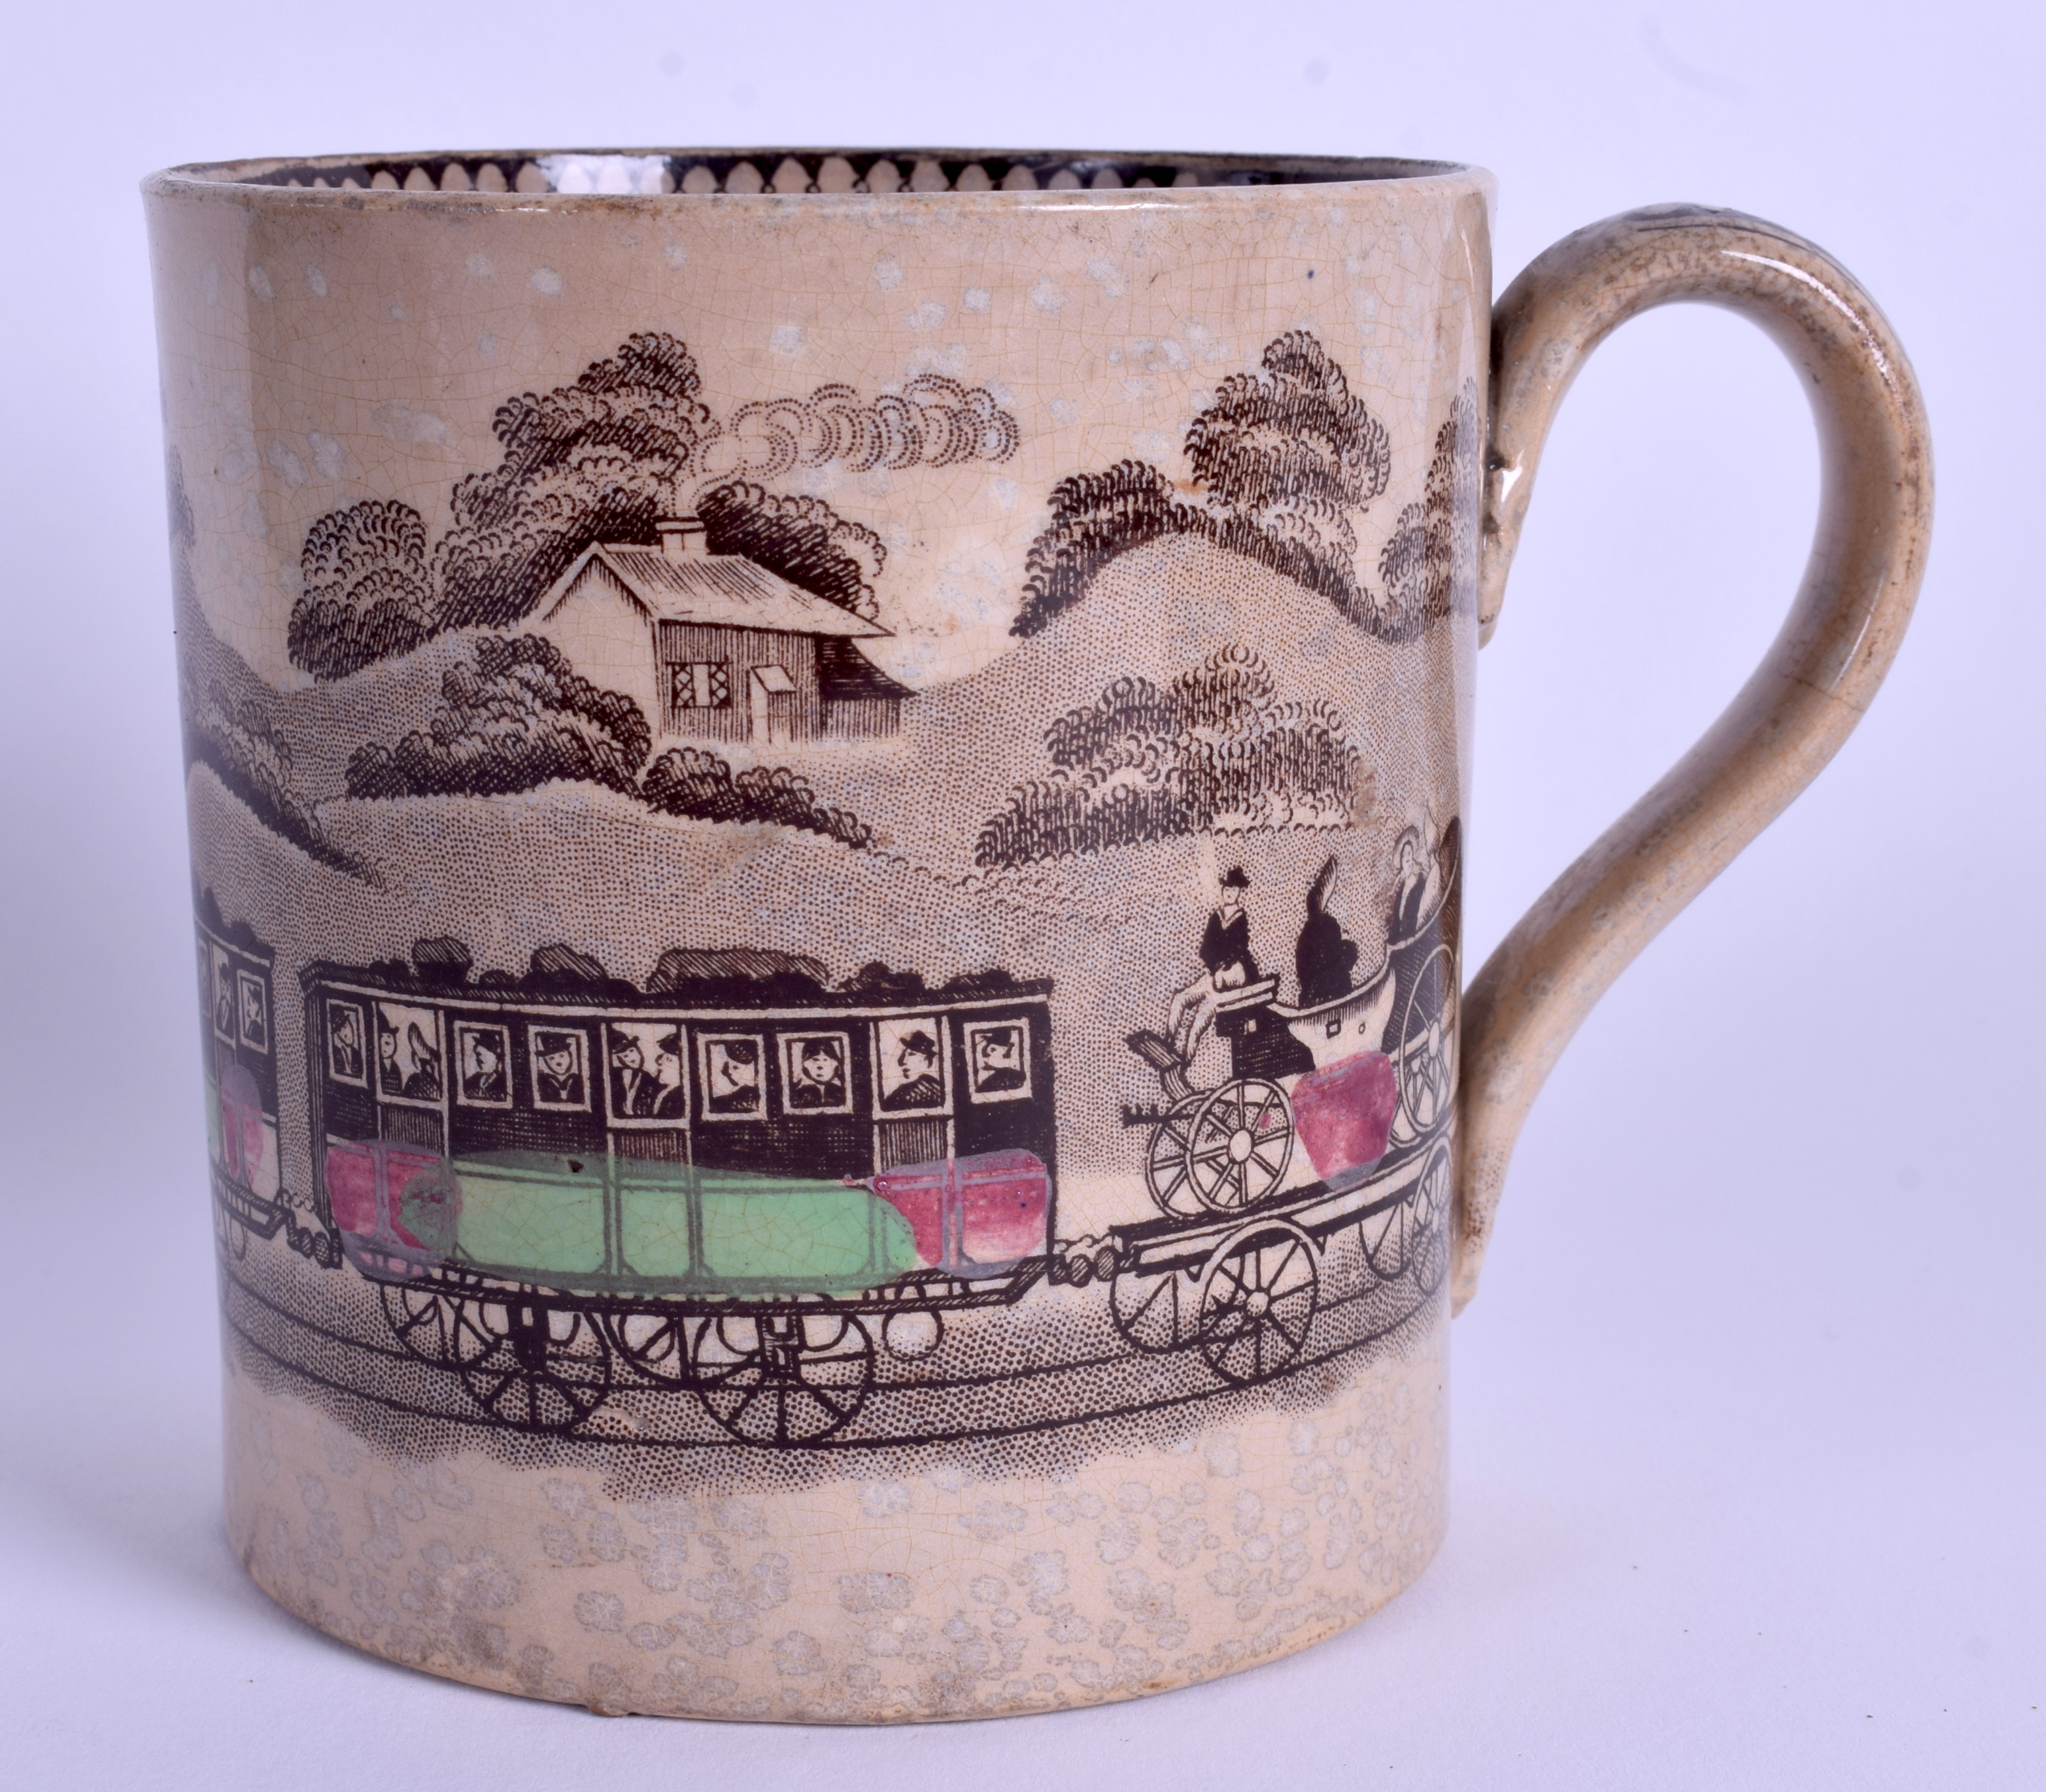 A RARE 19TH CENTURY STAFFORDSHIRE PRINTED TANKARD decorated with a locomotive. 12 cm x 10 cm.